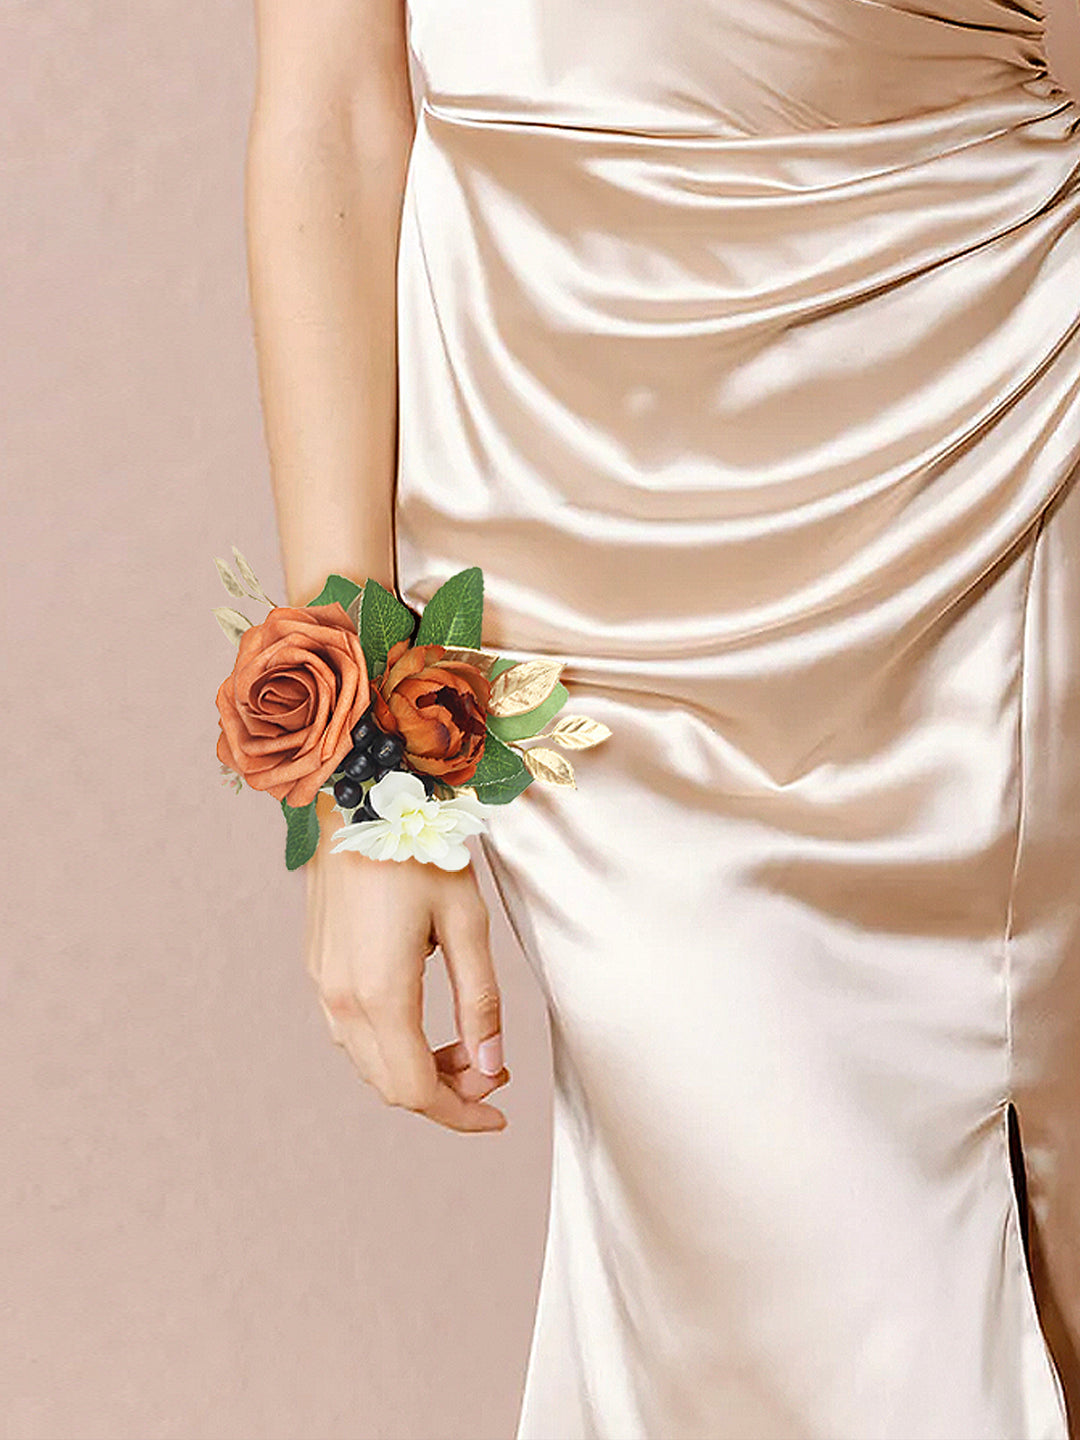 Why Wrist Corsages Are a Must-Have for Modern Weddings?